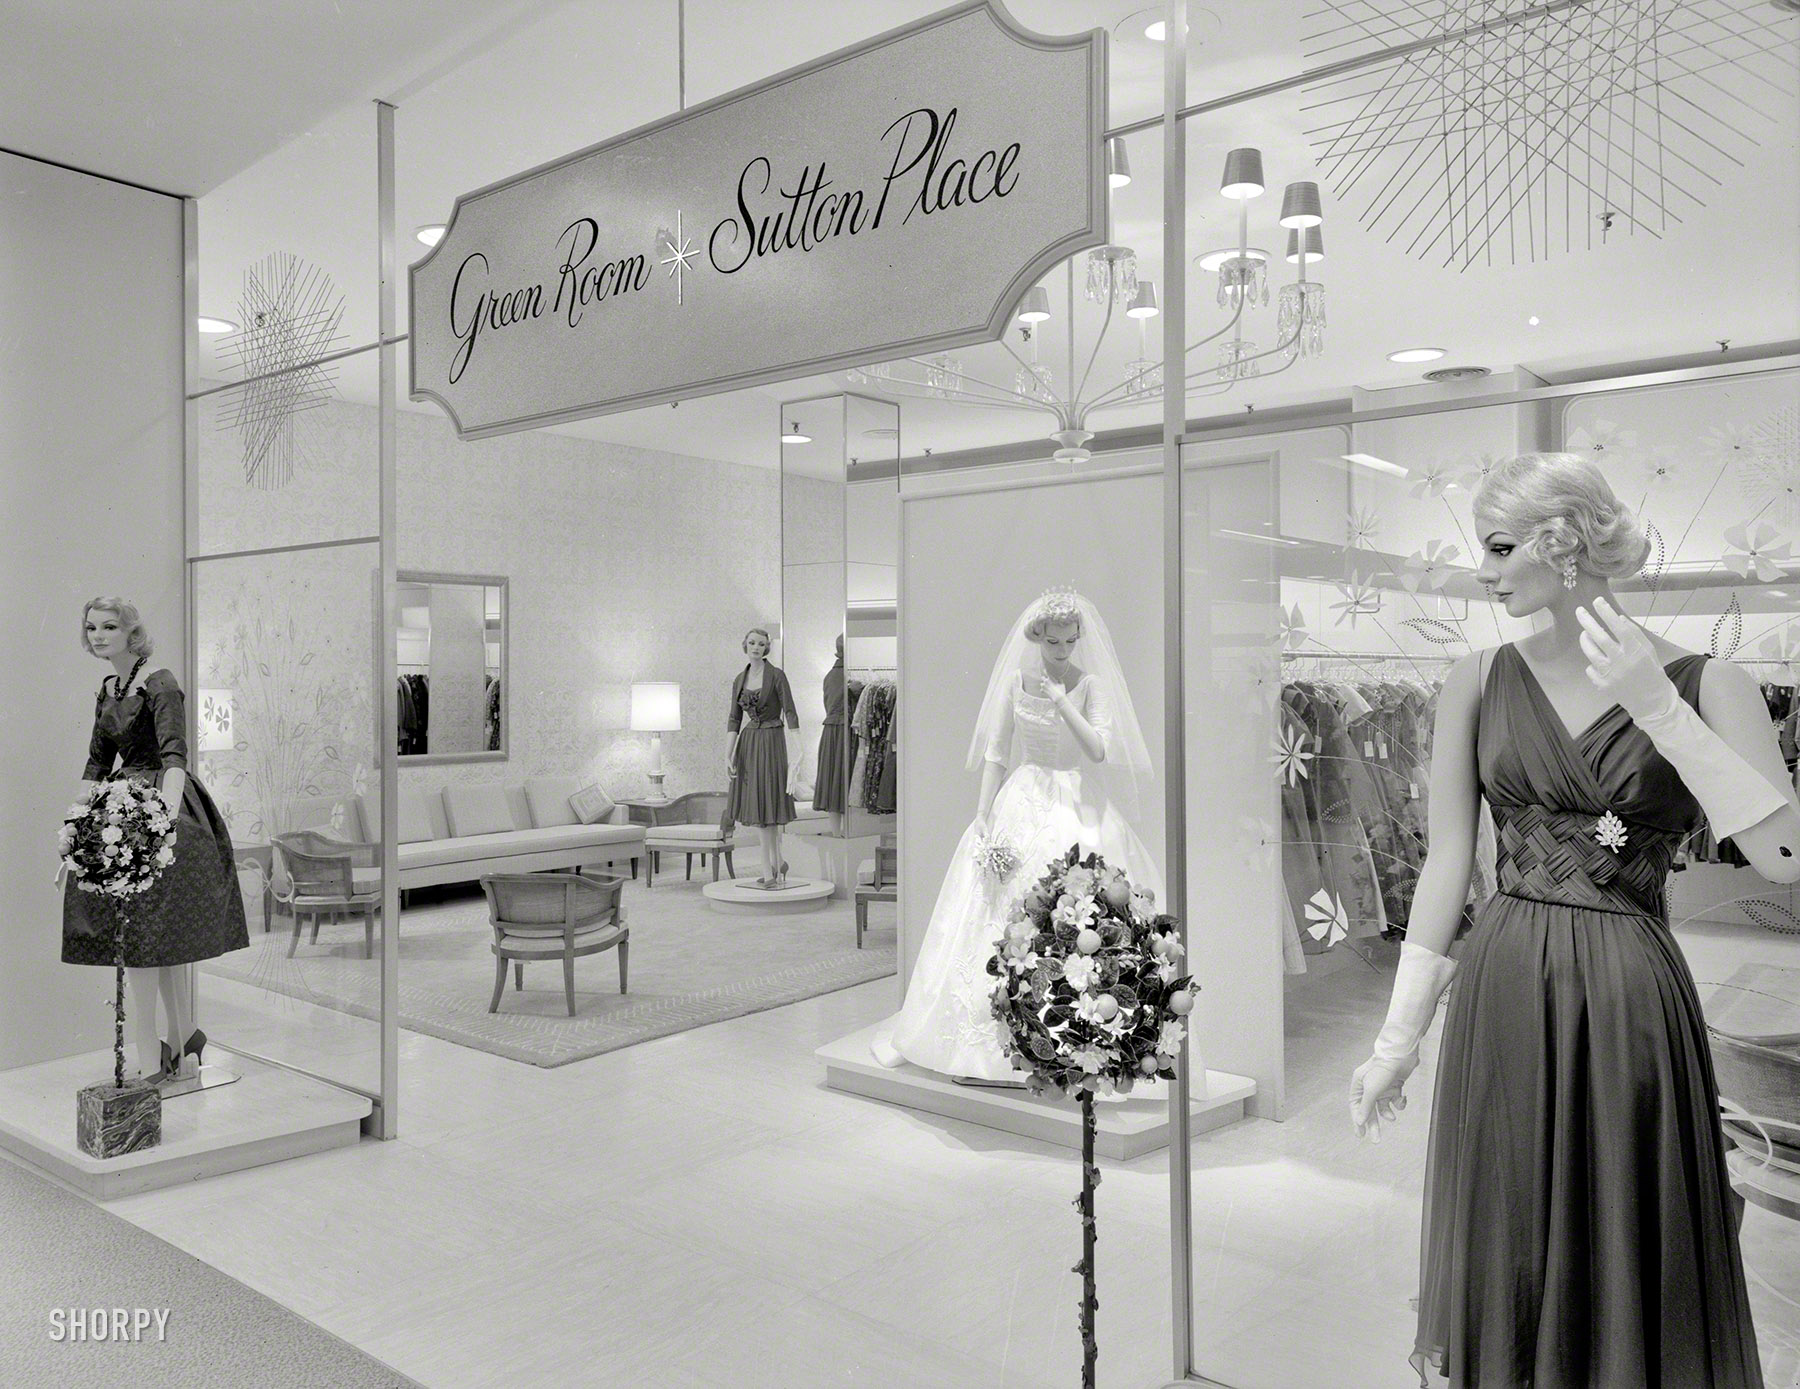 October 23, 1959. "Bloomingdale's, Hackensack, New Jersey. Green Room, Sutton Place. Raymond Loewy, client." Where all those Stepford Wives got their start. Large-format acetate negative by Gottscho-Schleisner. View full size.